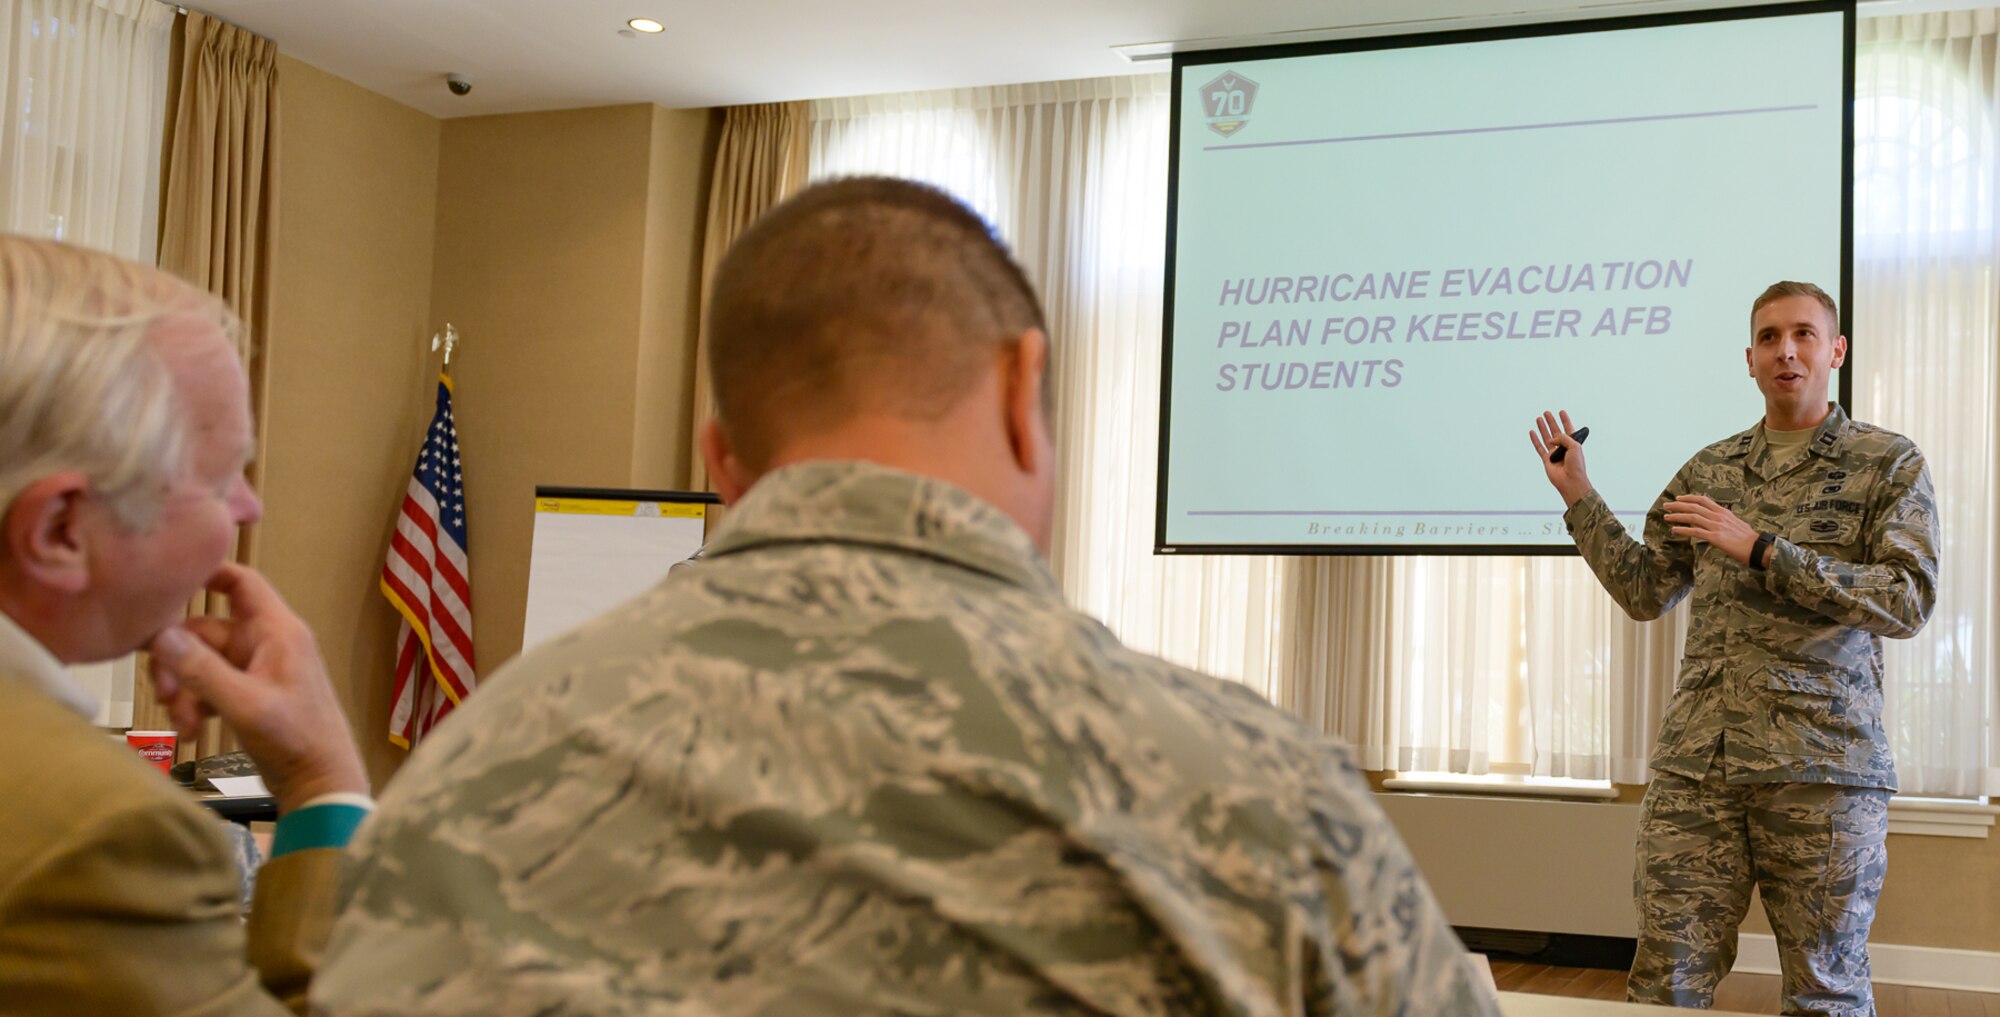 Capt. Keith Van Dyck, 81st Logistical Readiness Squadron director of operations, discusses Keesler’s student hurricane evacuation plan with Keesler and community leaders during the Air Force Community Partnership Program Agreements Workshop at the Gulf Park Campus of The University of Southern Mississippi Oct. 25, 2017, Long Beach, Mississippi. The program is part of a larger Air Force Public-Public, Public-Private (P4) initiative to encourage installations and local communities to combine or improve resources or operating processes. Mississippi representatives from state and local communities and various civic leaders attended the event. (U.S. Air Force photo by Andre’ Askew)